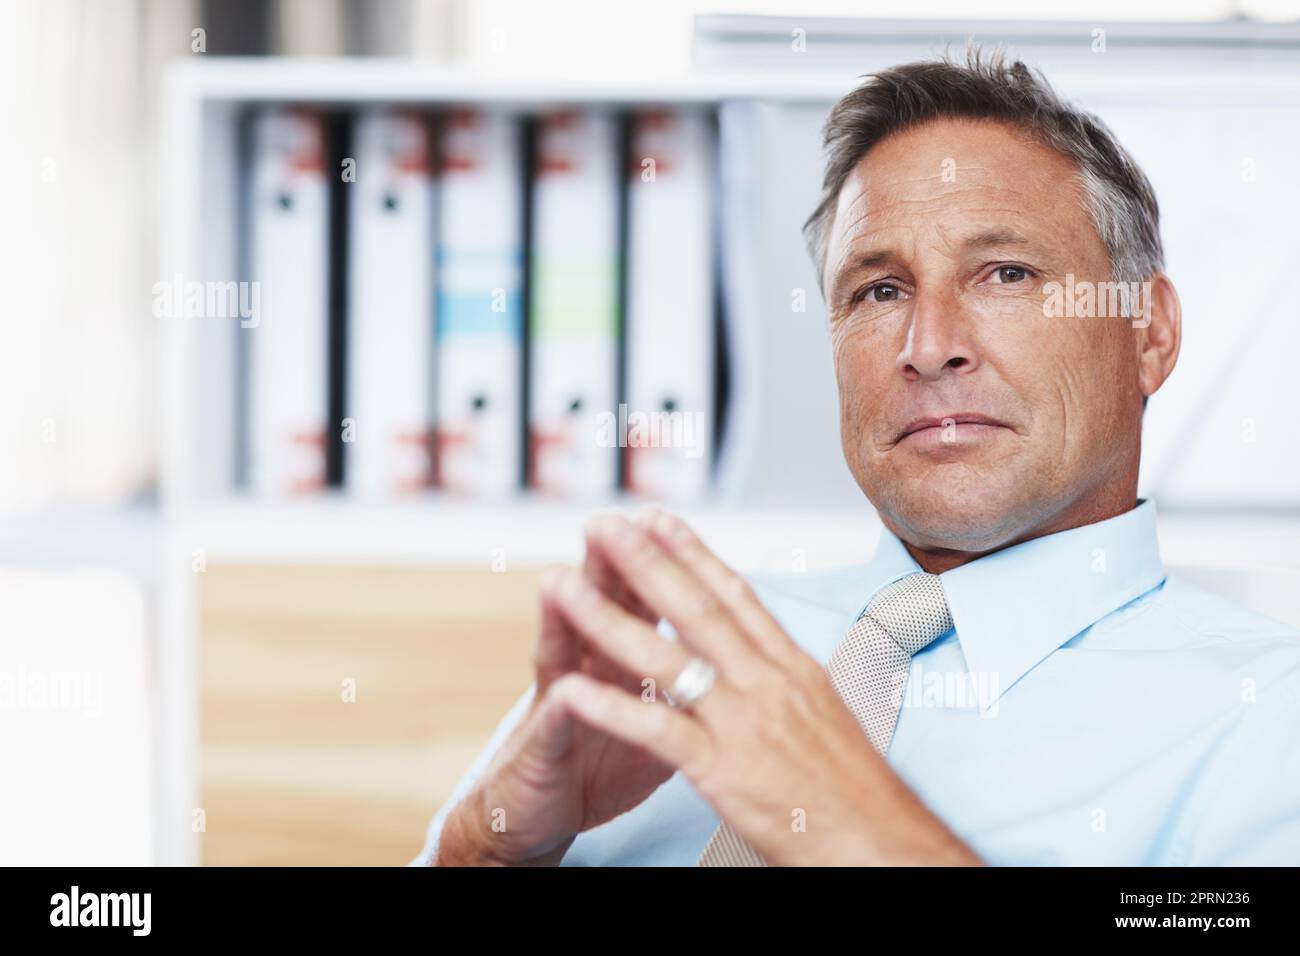 Contemplating your business proposal. Portrait of a respected business manager sitting at his desk with steepled hands. Stock Photo